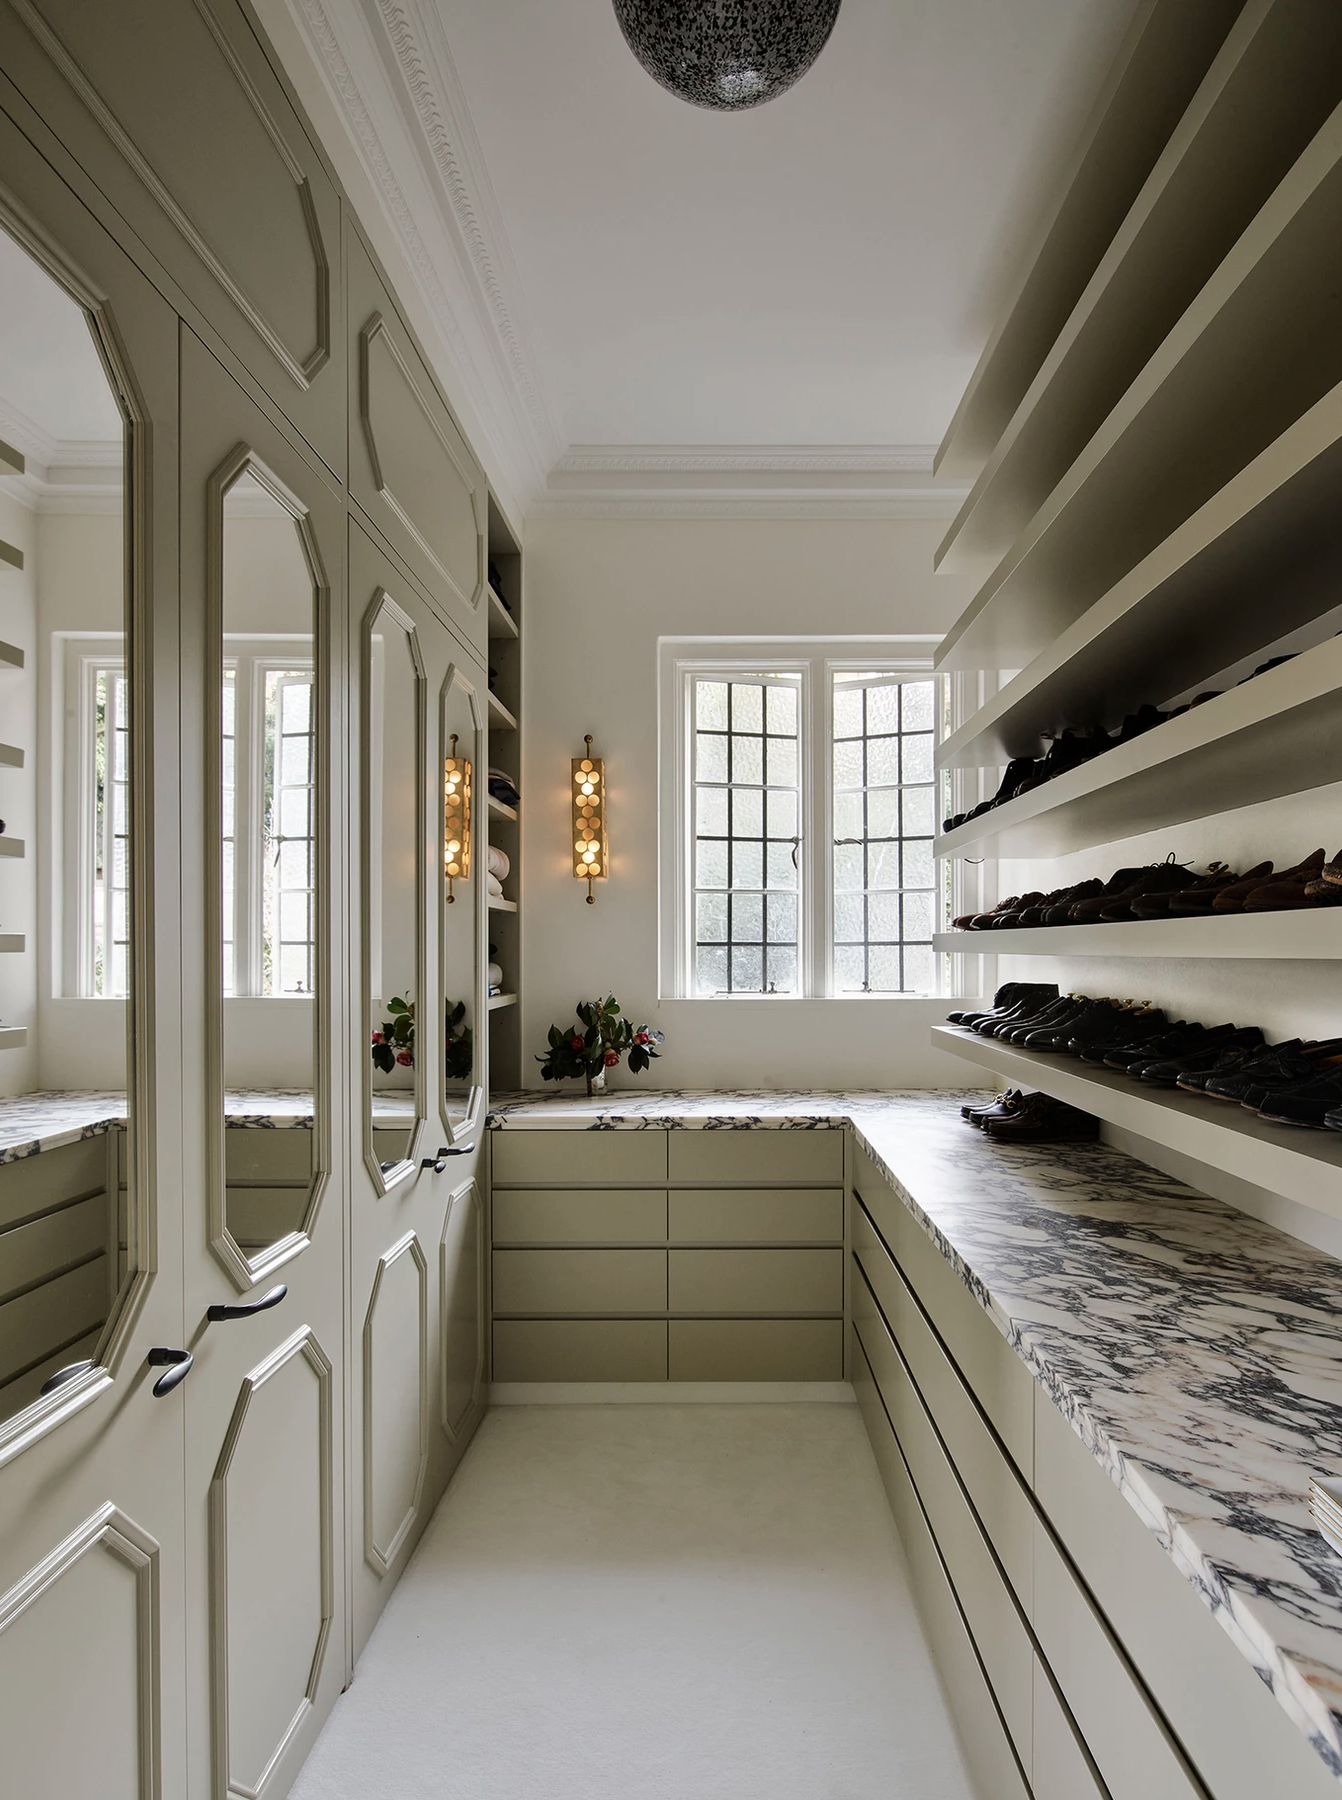 Homes With Gigantic Walk-in Closets